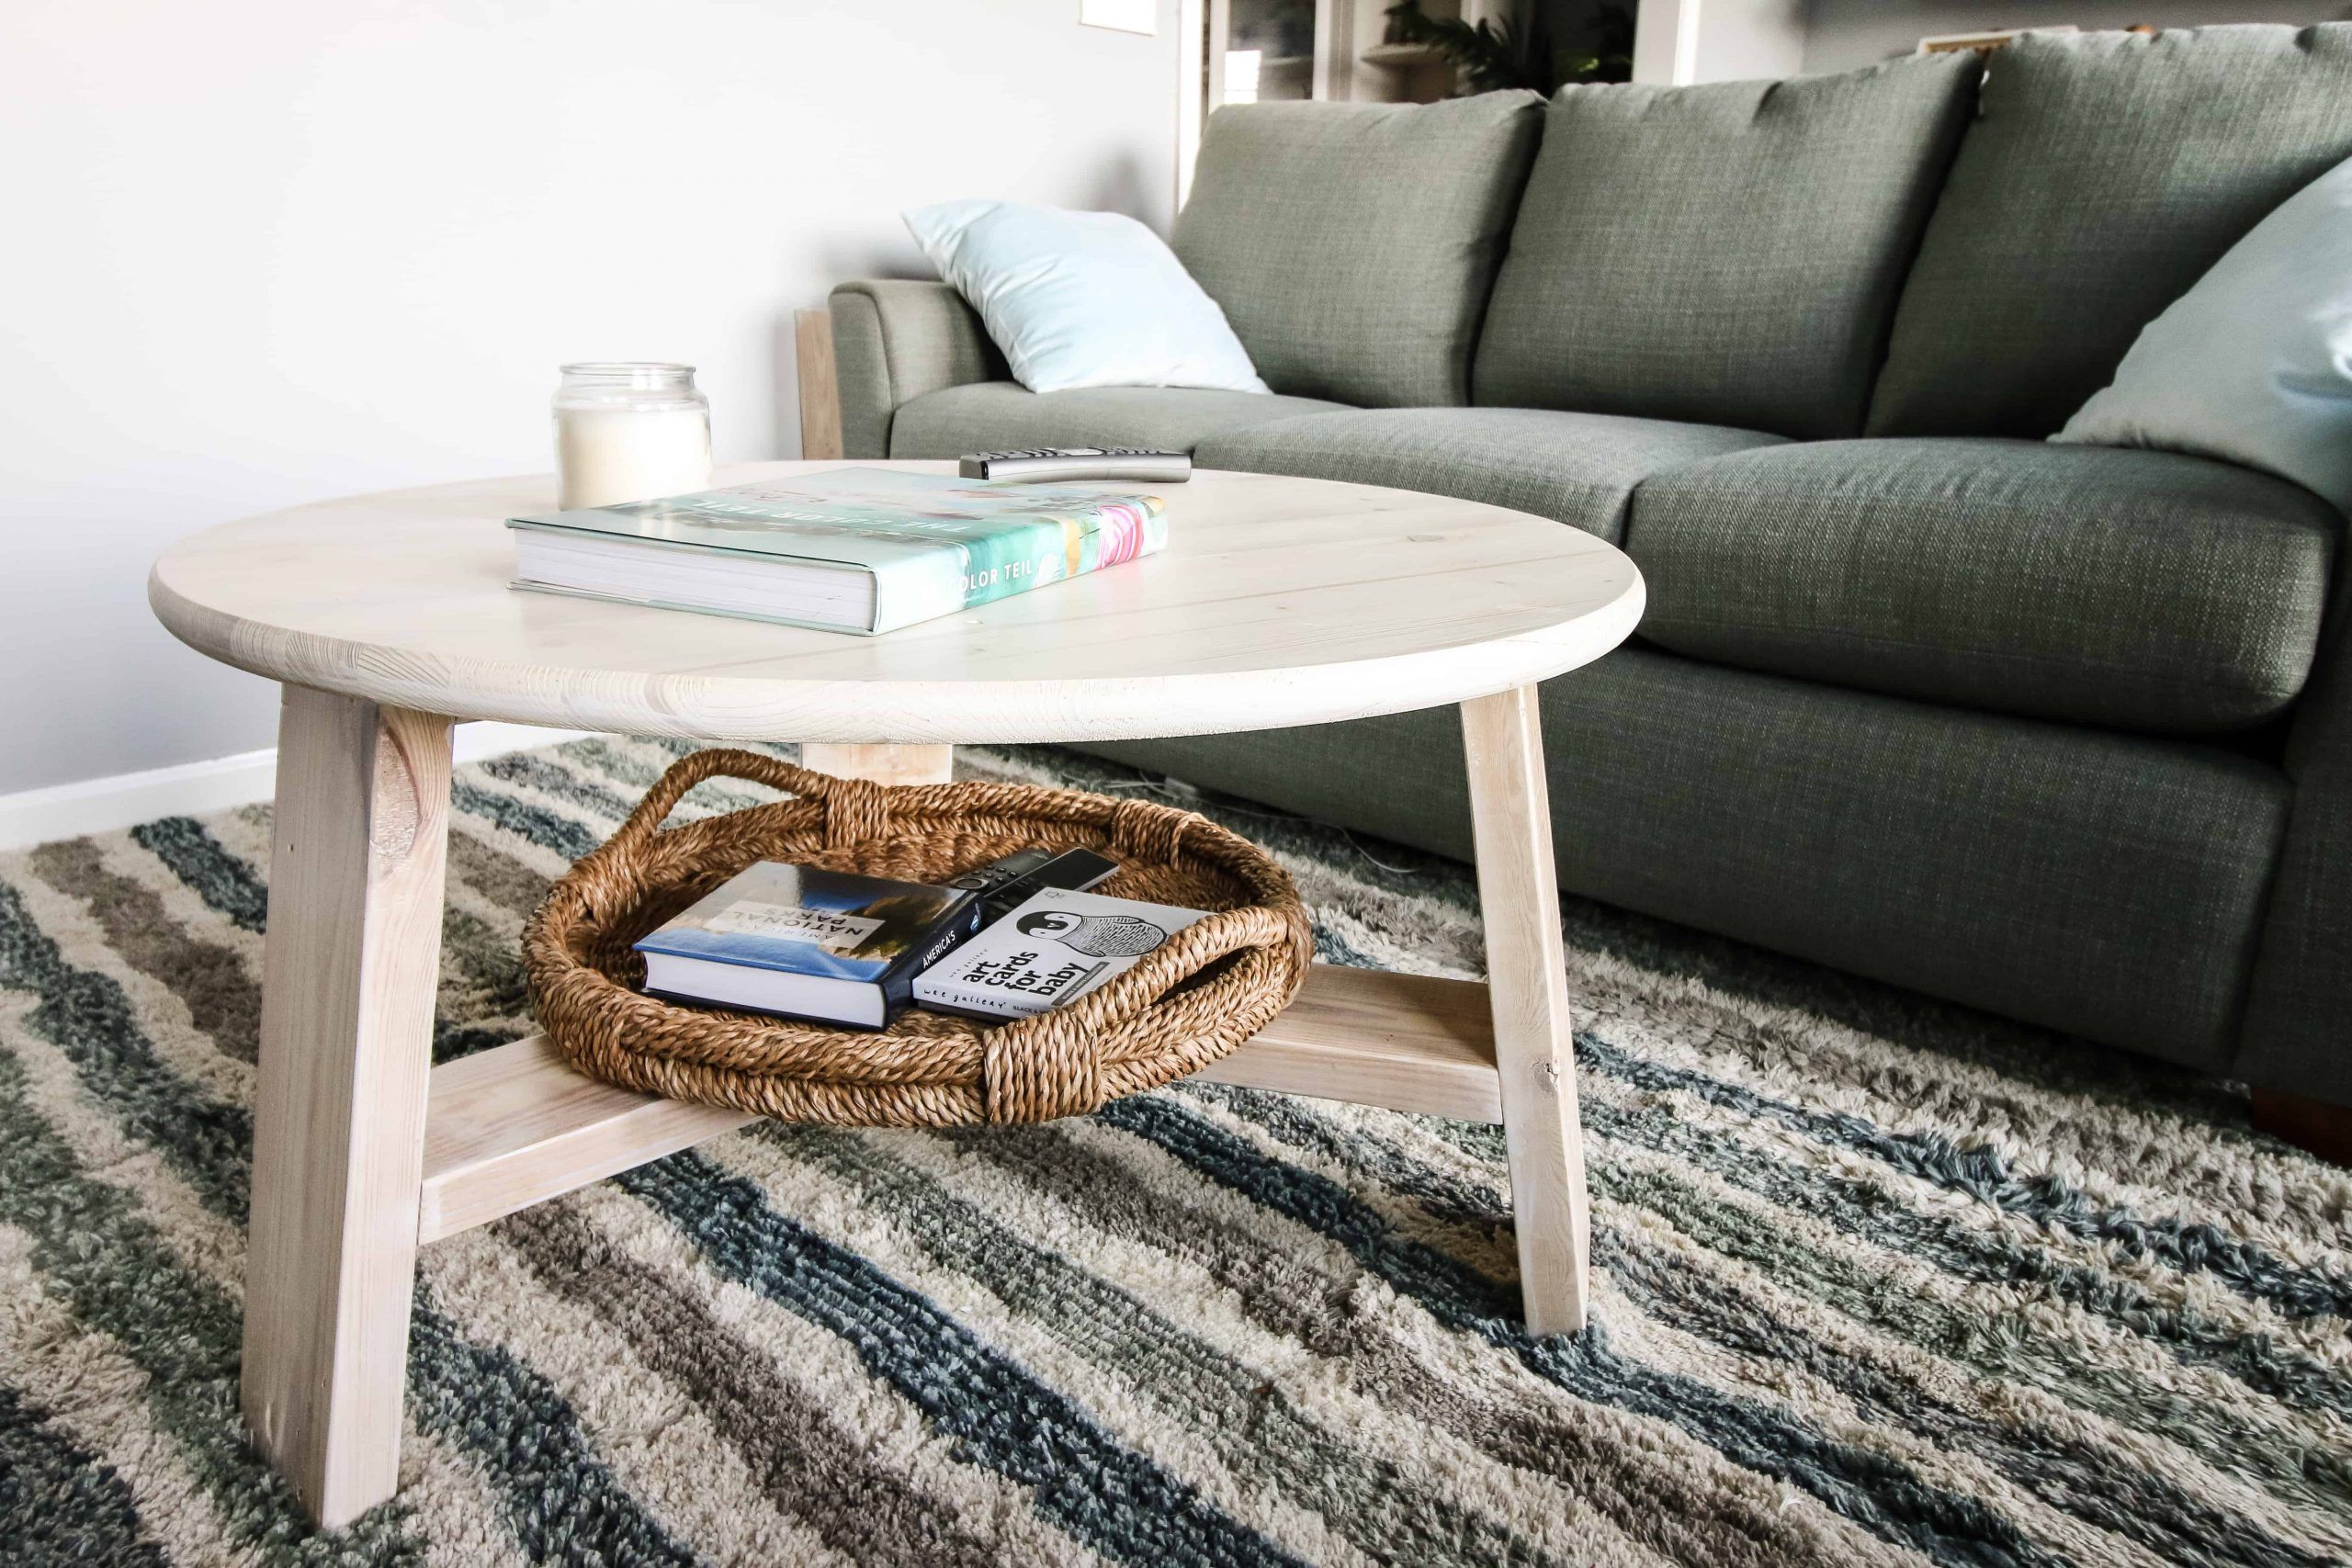 How To Build An Easy, Modern, Diy Coffee Table For Simple Design Coffee Tables (View 11 of 15)